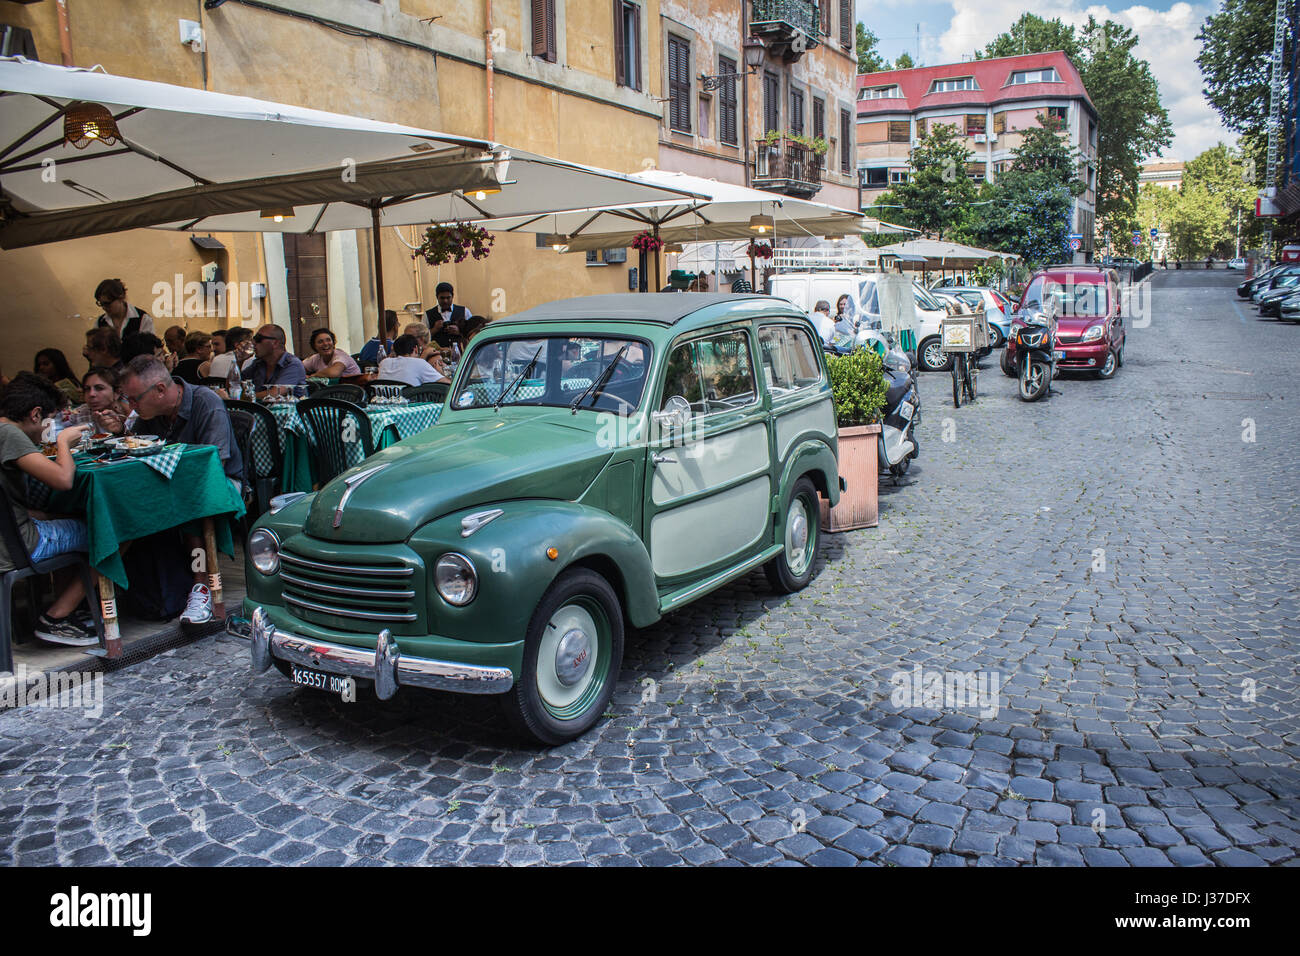 What's not to love?? This old, green car on a side street in Rome was just begging to be taken for a ride. Stock Photo